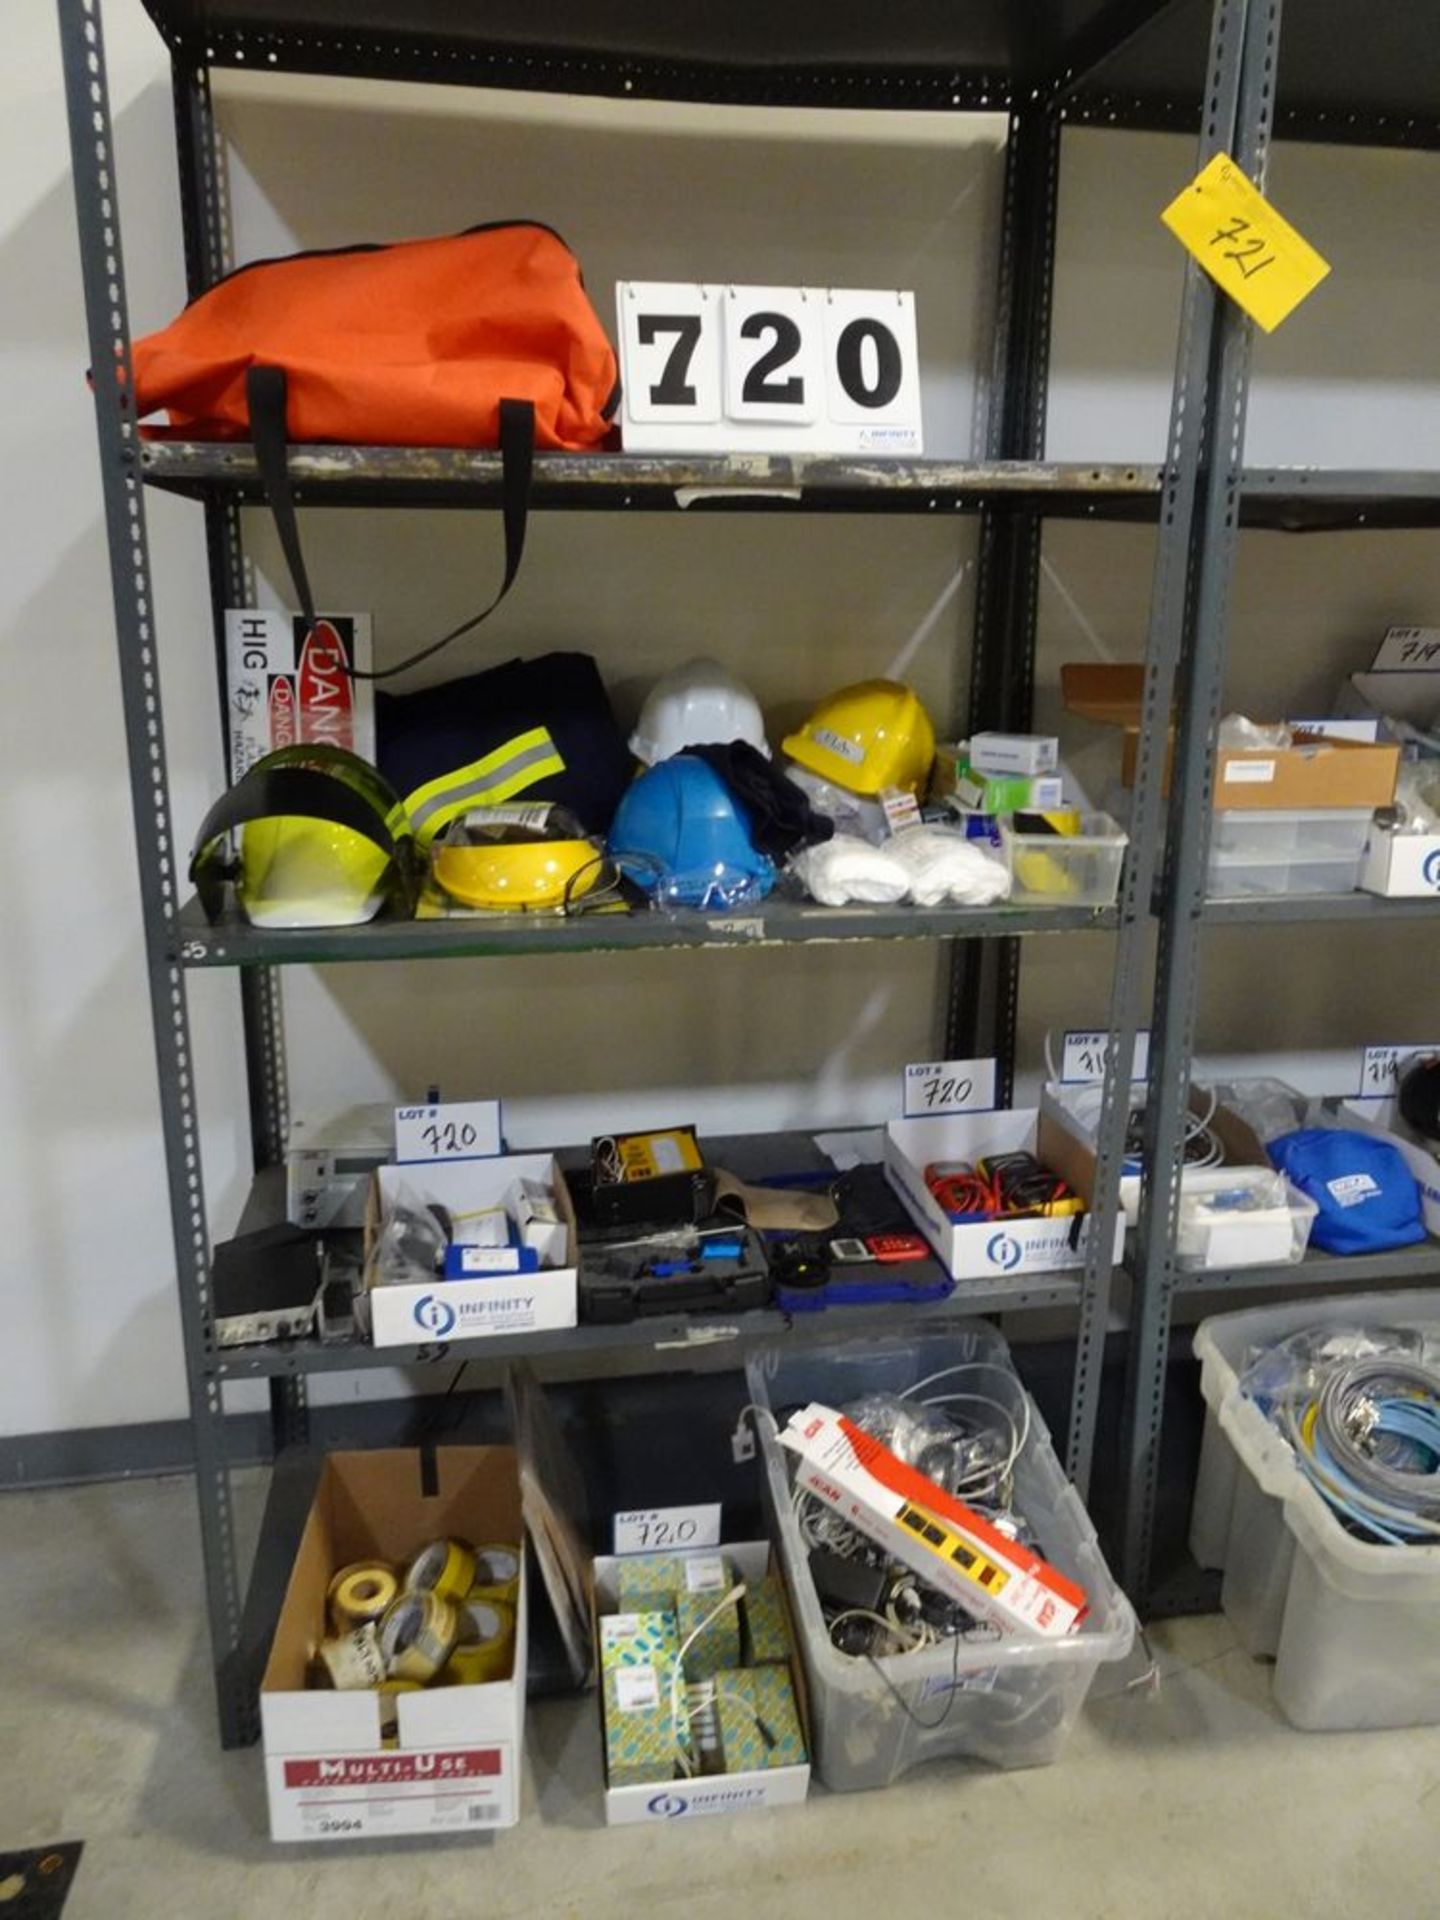 ASSORTED PRODUCT, SAFETY SUPPLIES, ELECTRICAL TESTERS, ETC.